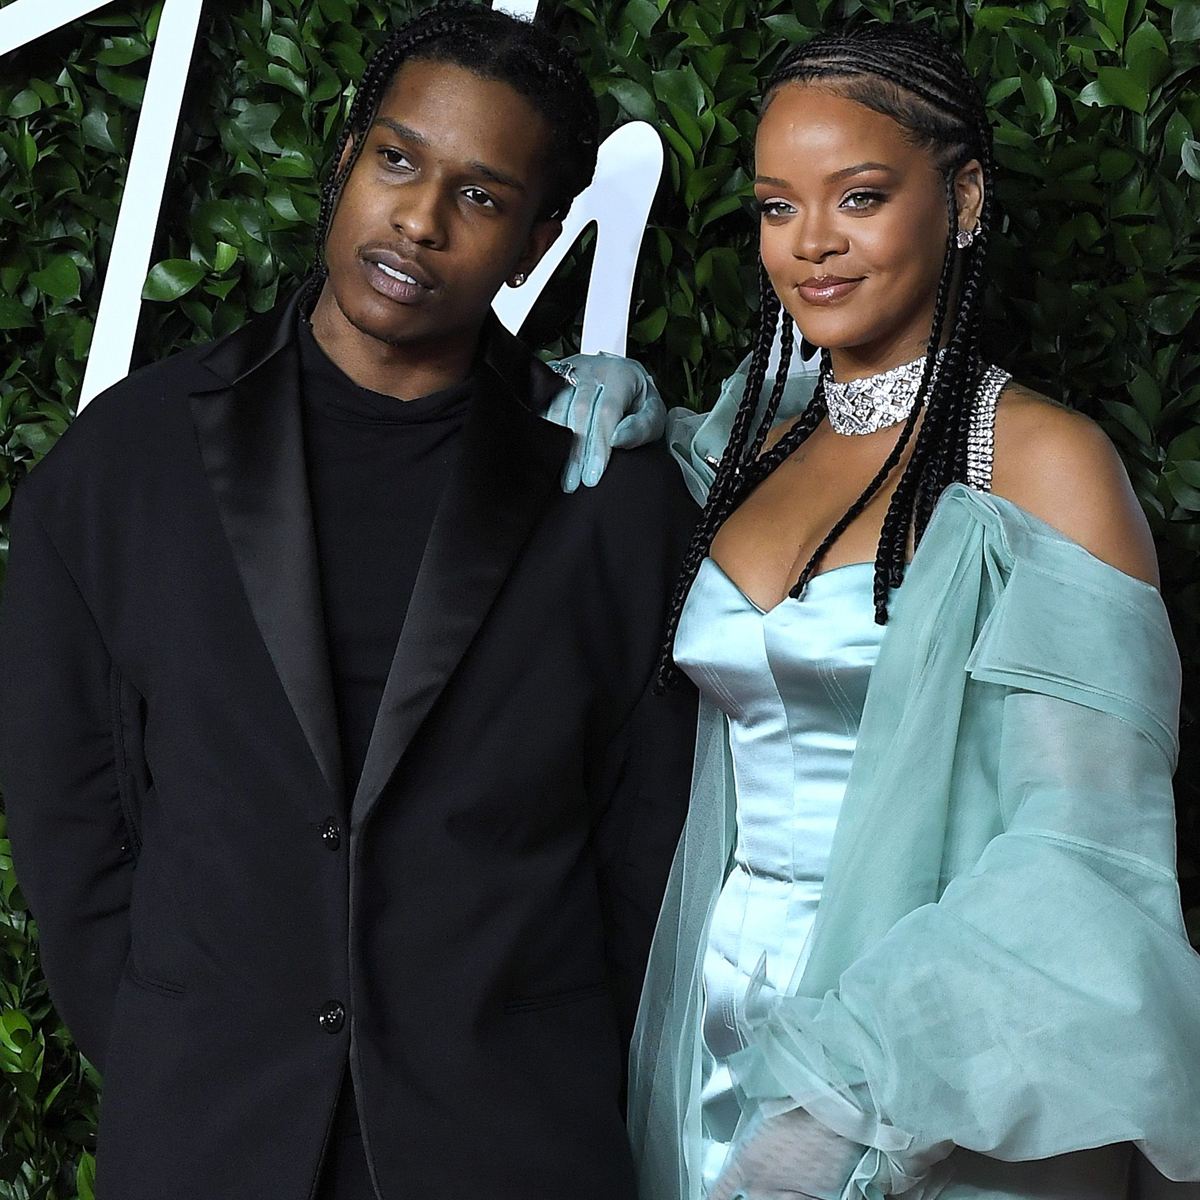 Rihanna and her Man ASAP Rocky recently attended a private